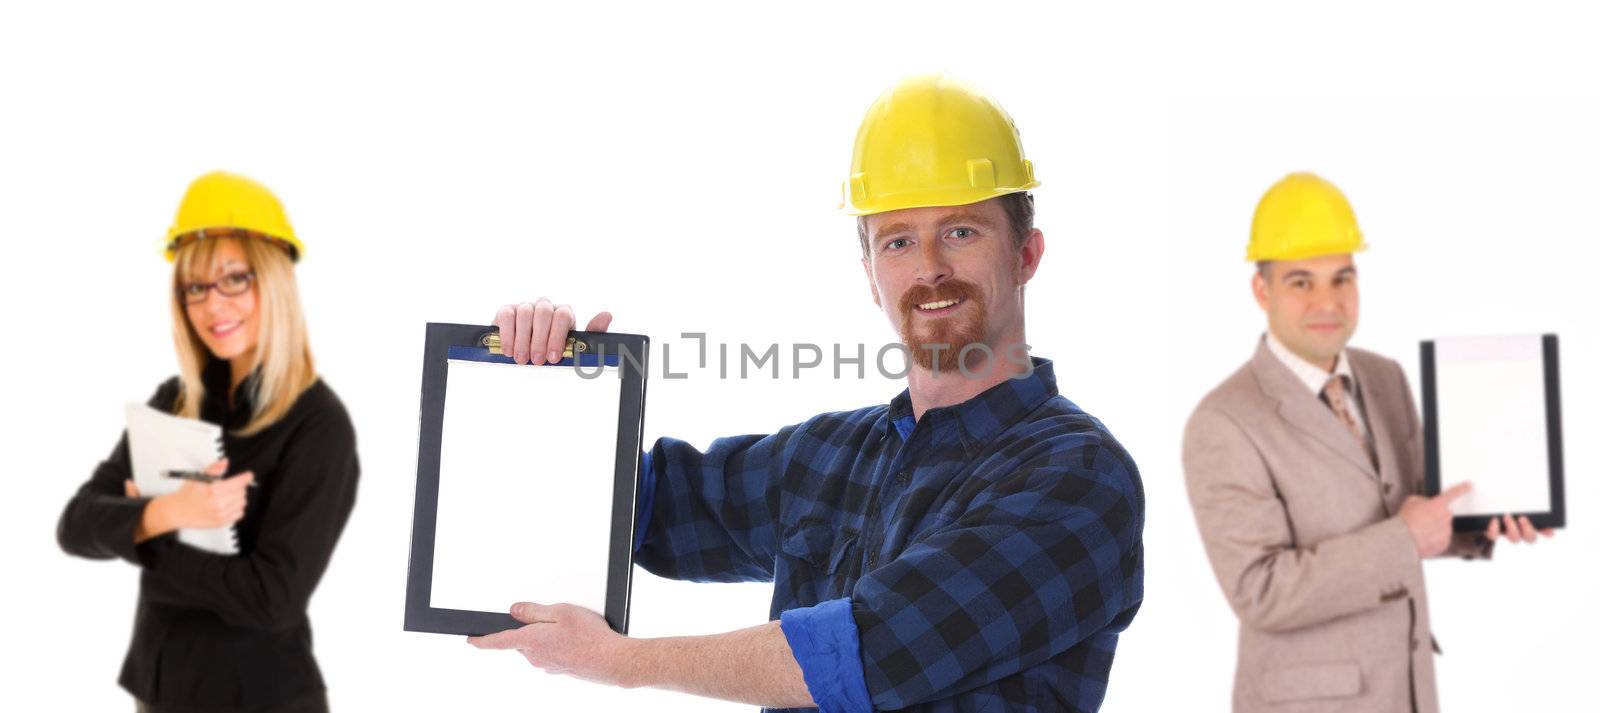 businesswoman, businessman and construction worker on white background